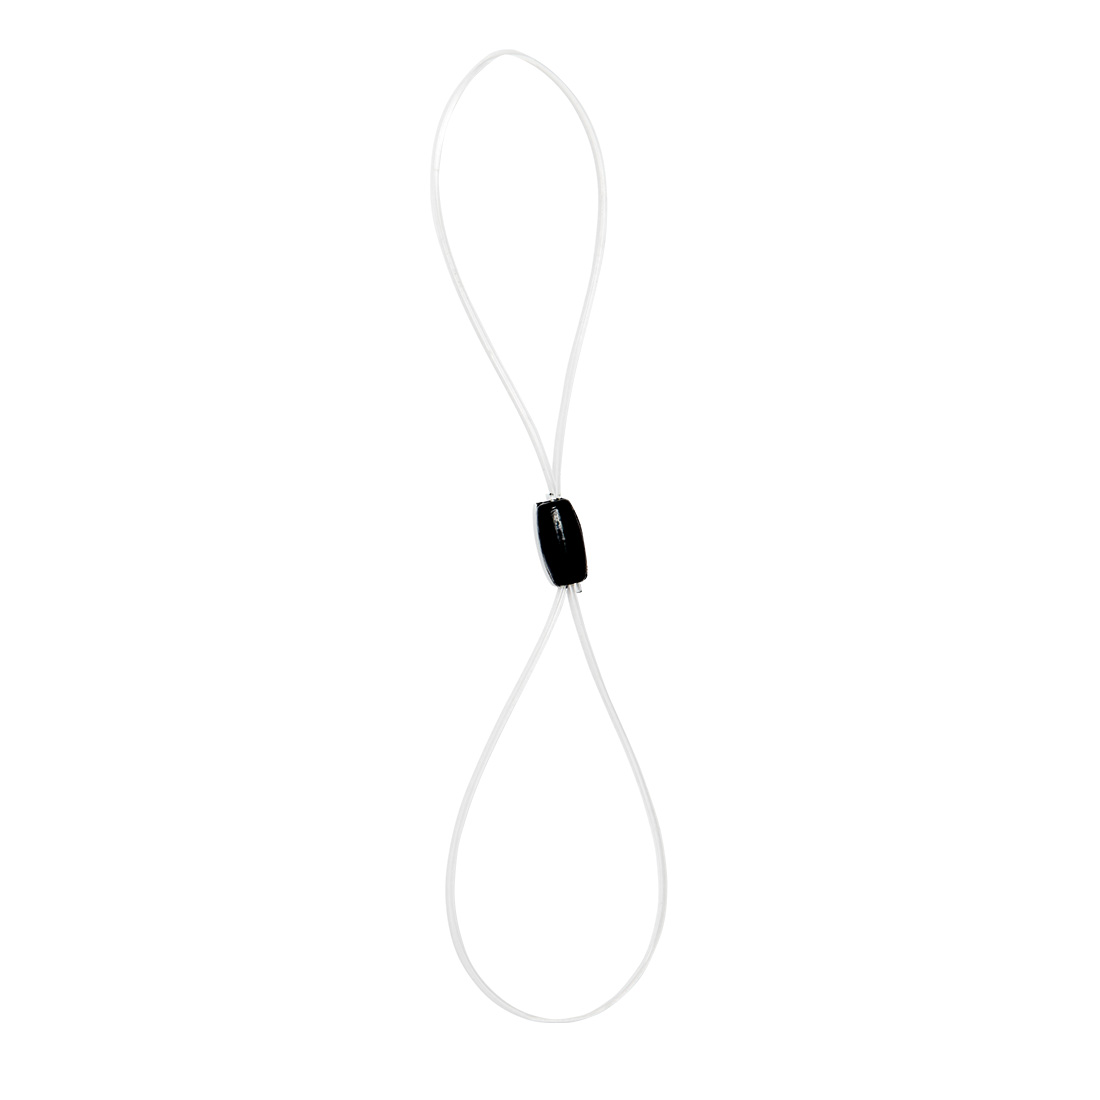 Shop Cochlear Safety Line (Short Double Loop)